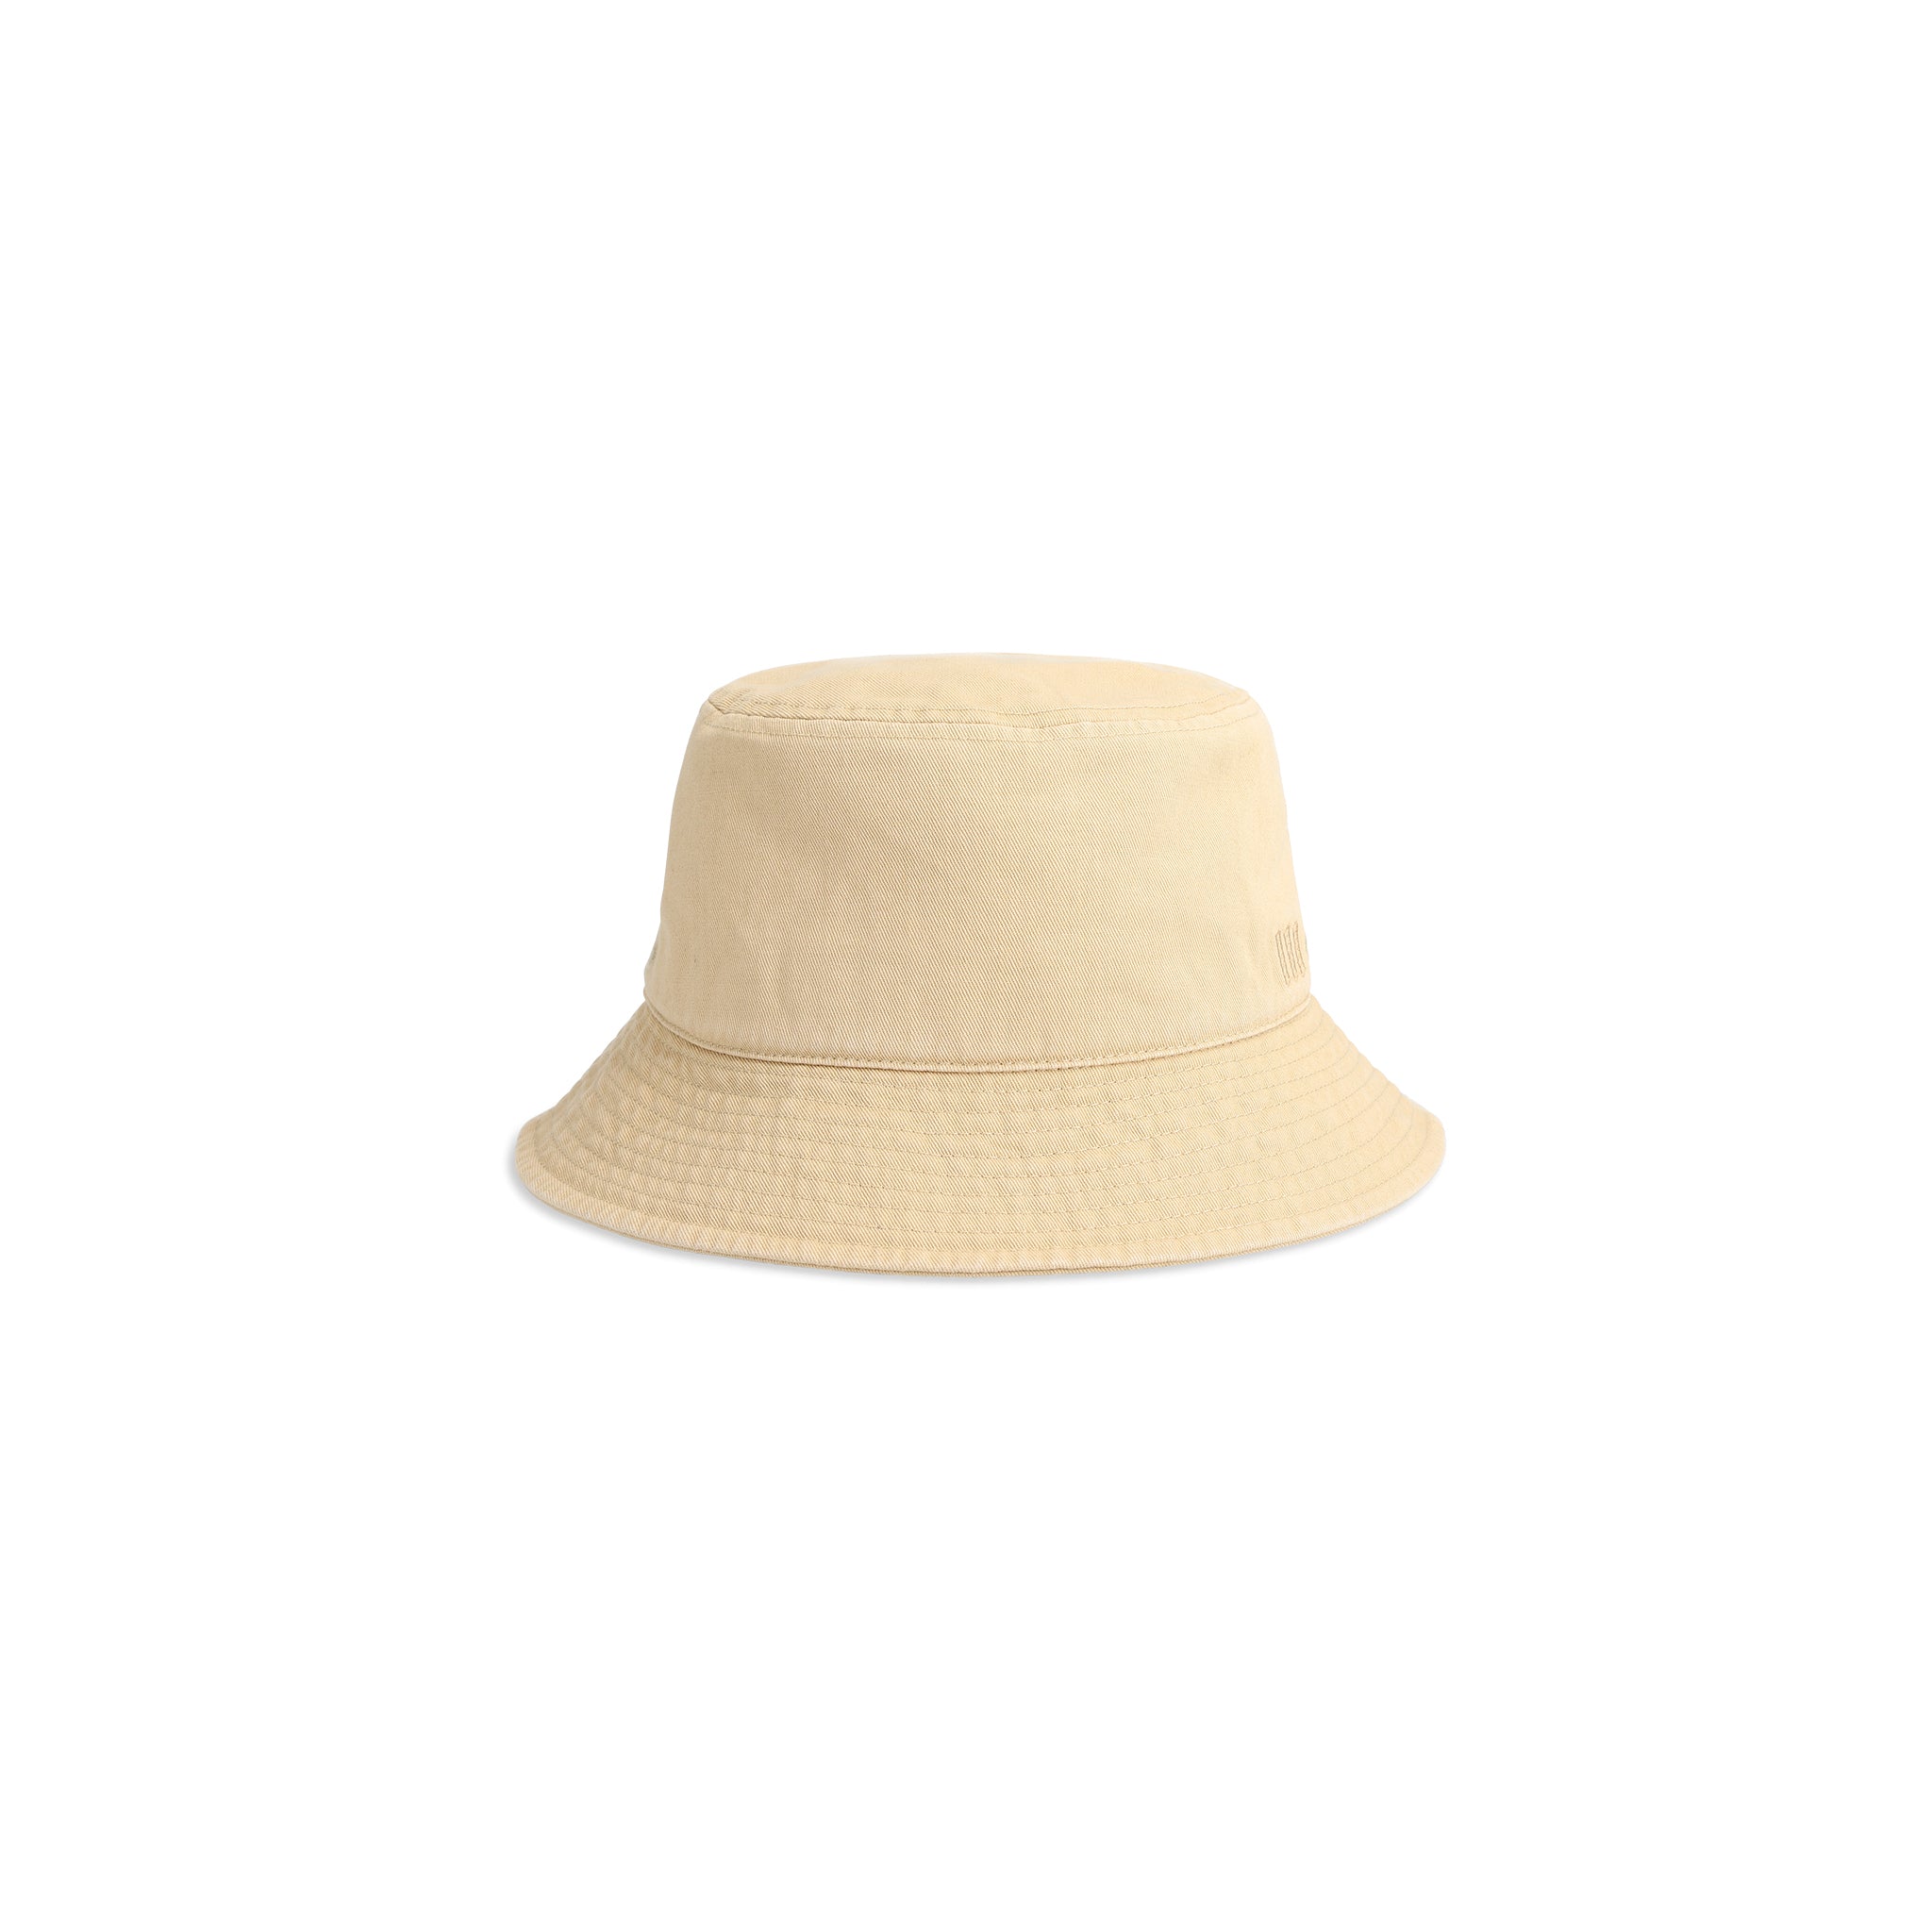 Back View of Topo Designs Dirt Bucket Hat in "Sahara"